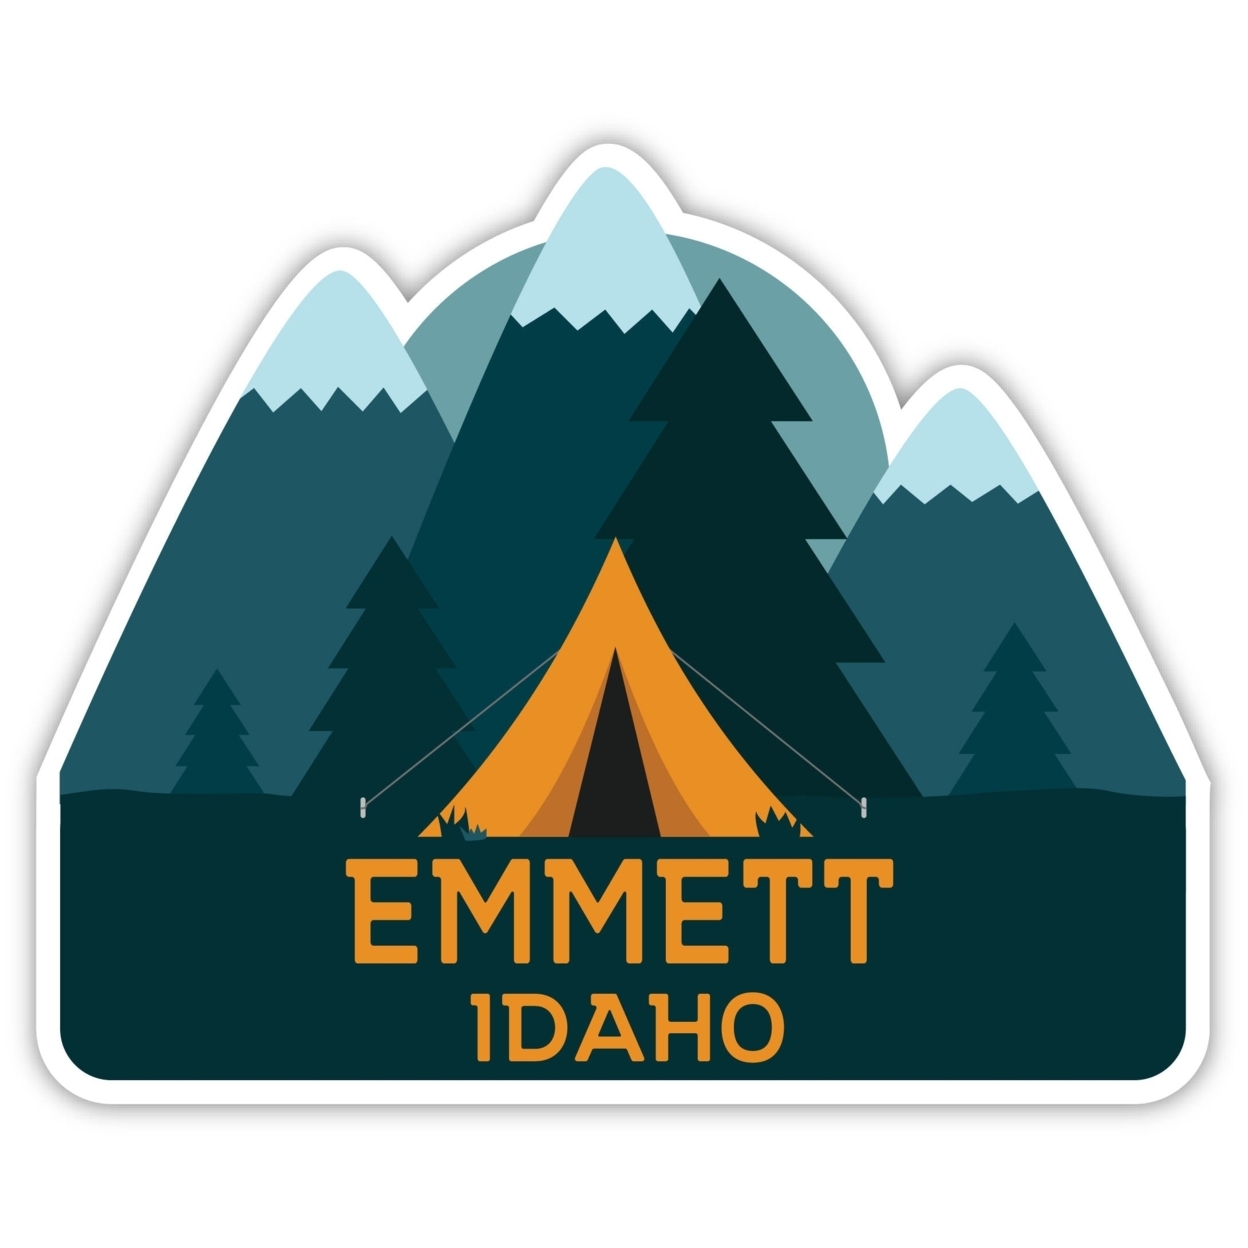 Emmett Idaho Souvenir Decorative Stickers (Choose Theme And Size) - 4-Pack, 4-Inch, Tent